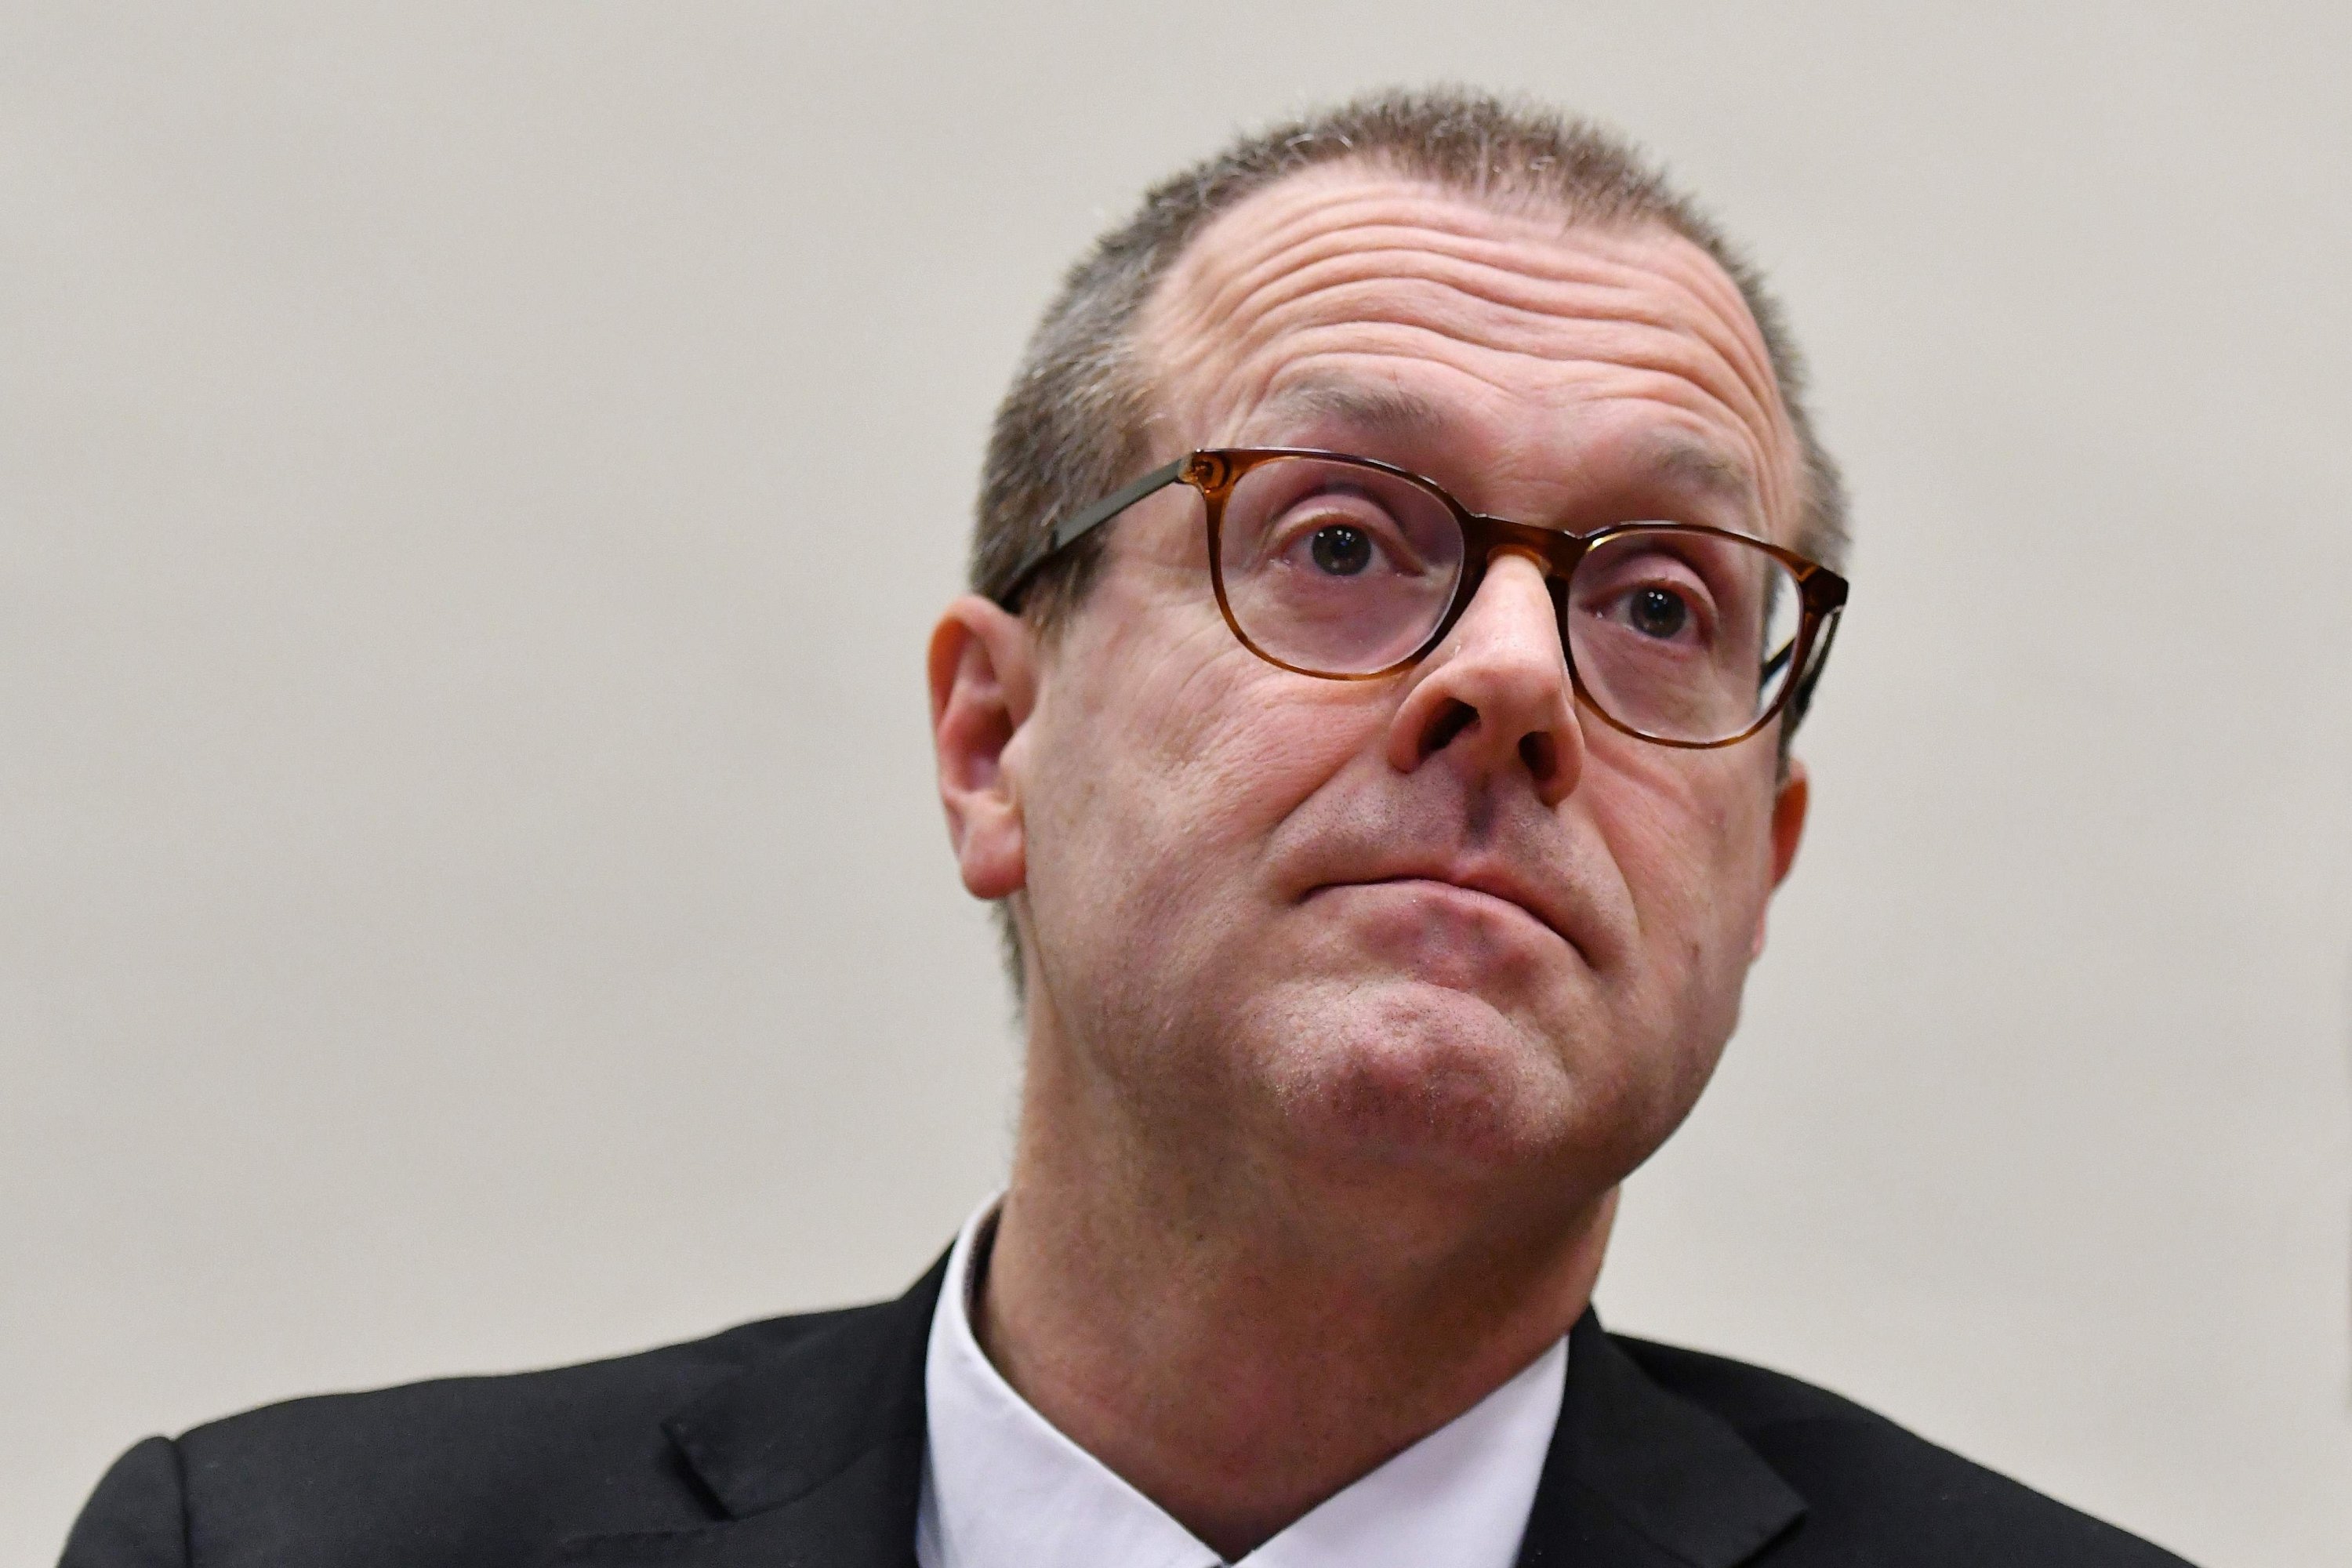 WHO Europe Director Hans Kluge gives a news conference on the outbreak of COVID-19, also known as the coronavirus, in Rome, Italy, Feb. 26, 2020. (AFP Photo)